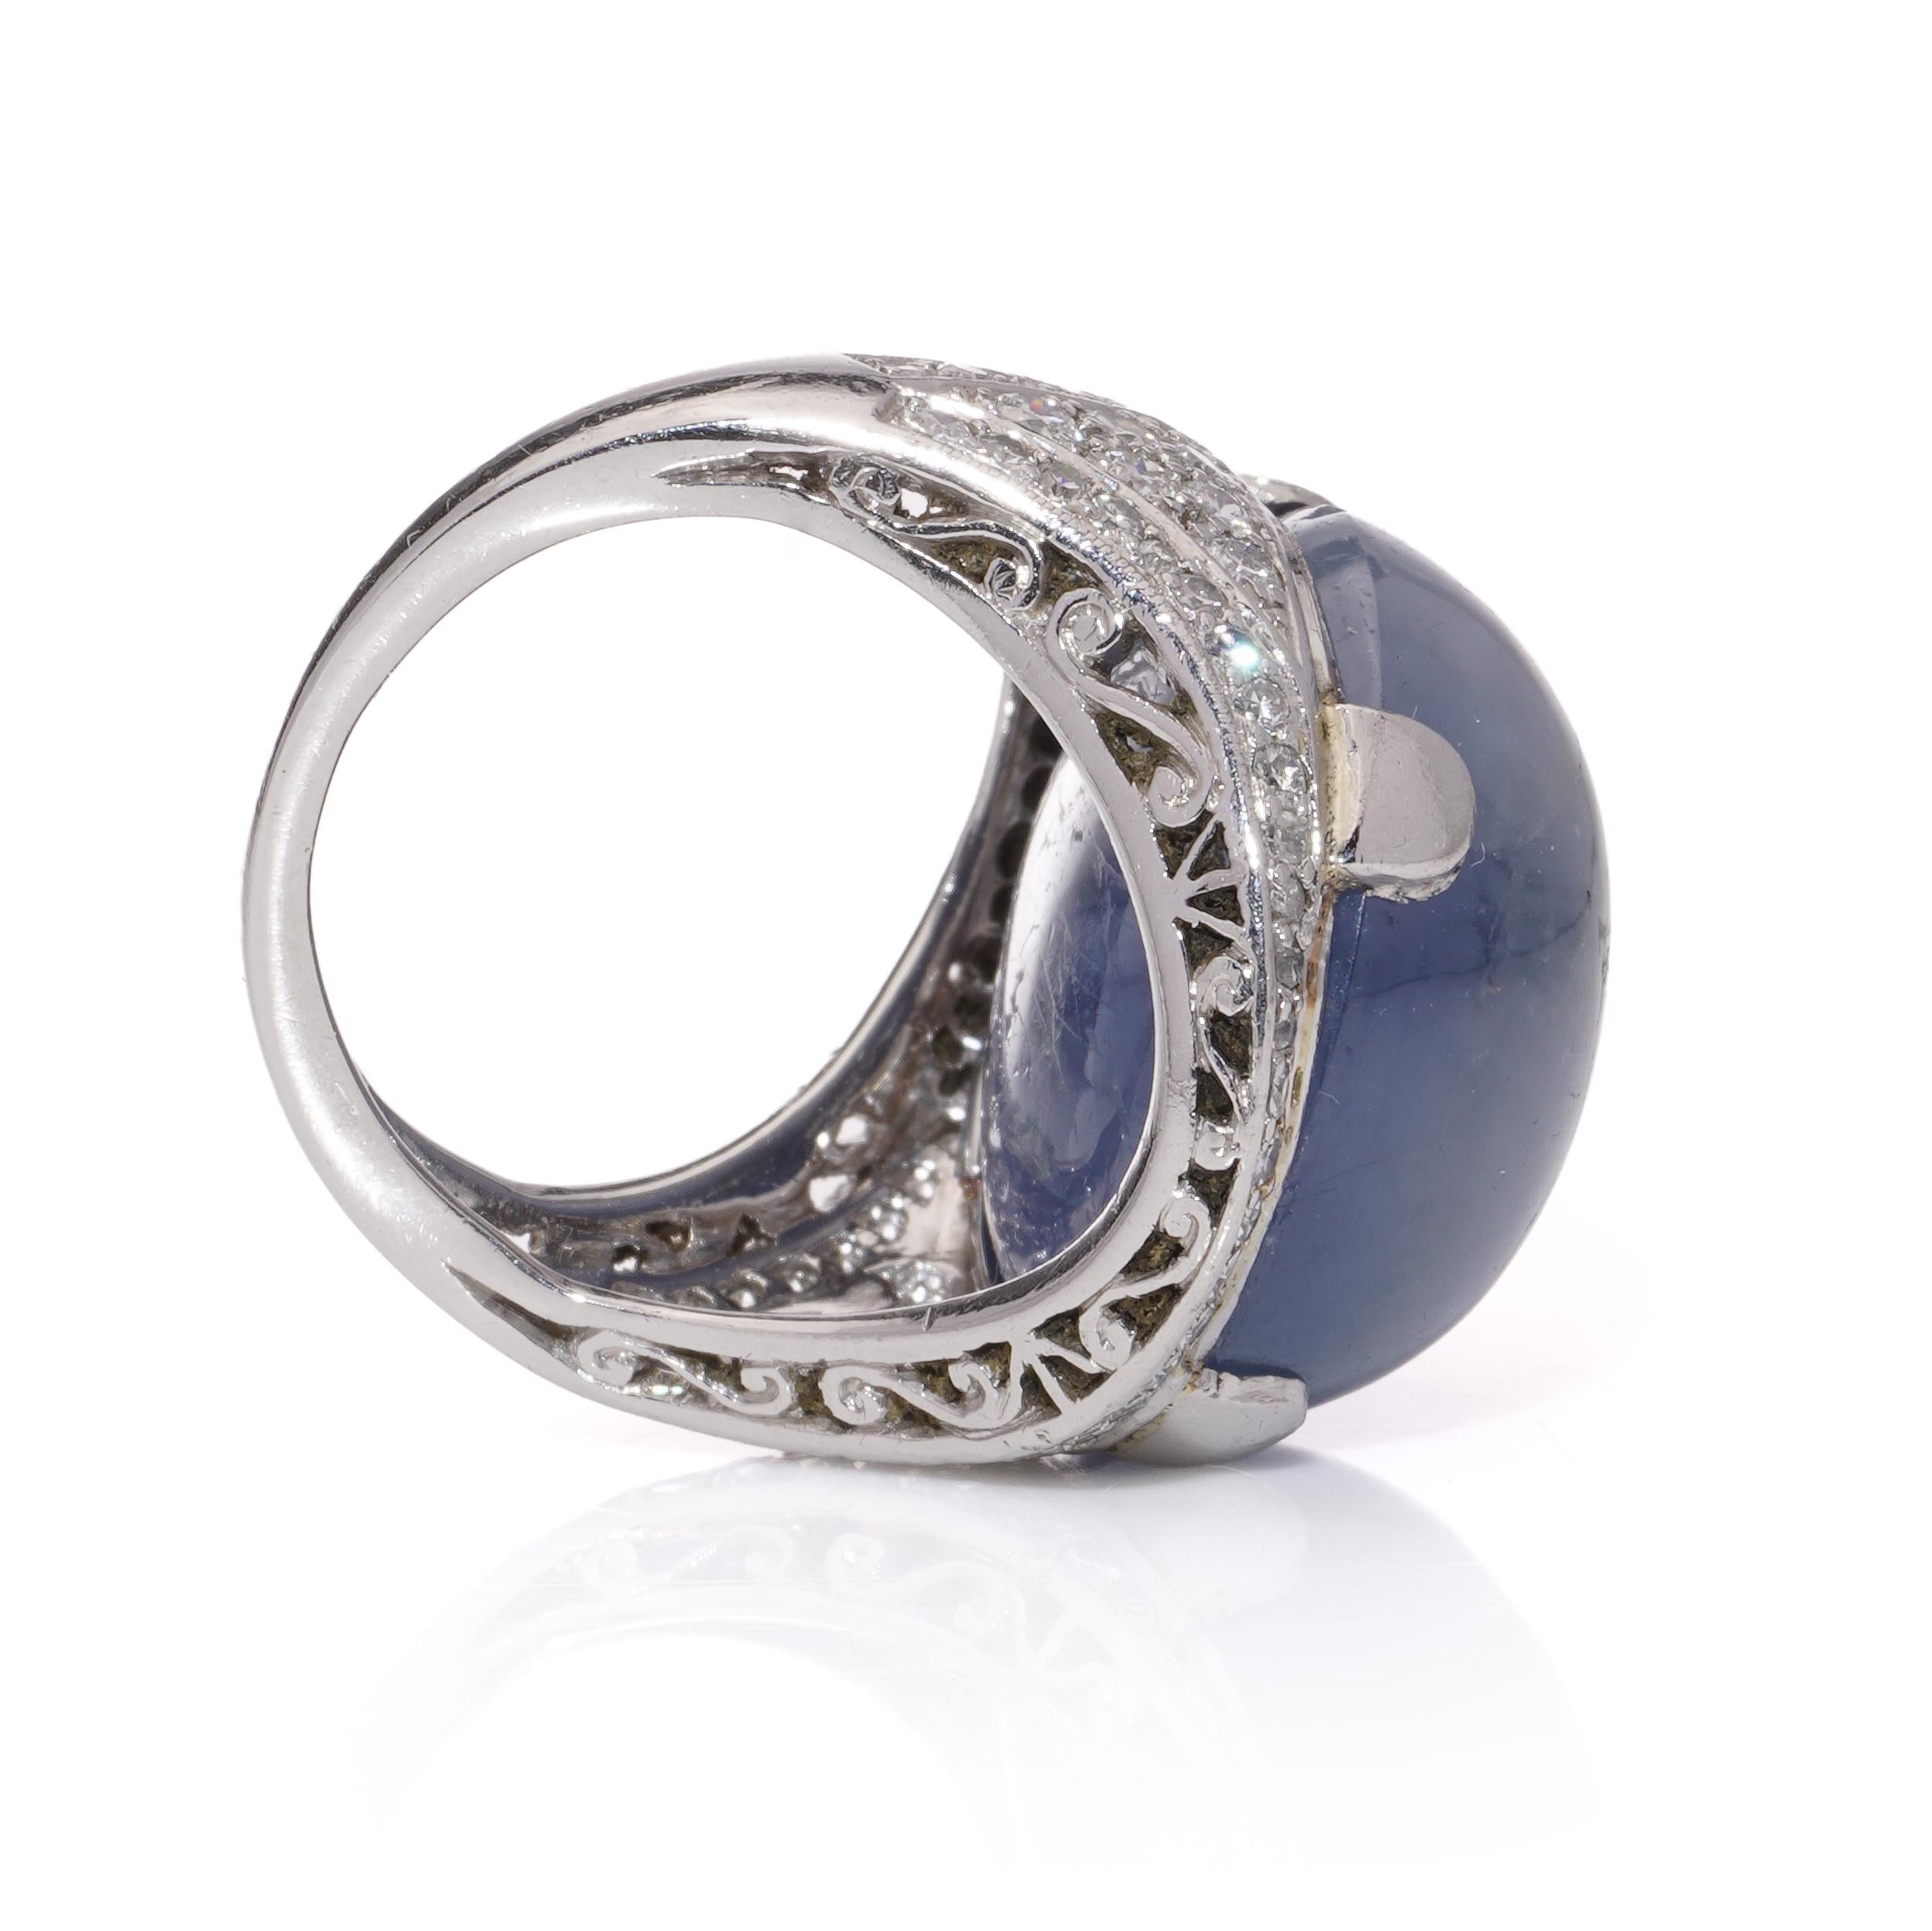 Platinum ladies' dome ring with 46 cts. of round natural cabochon sapphire For Sale 2